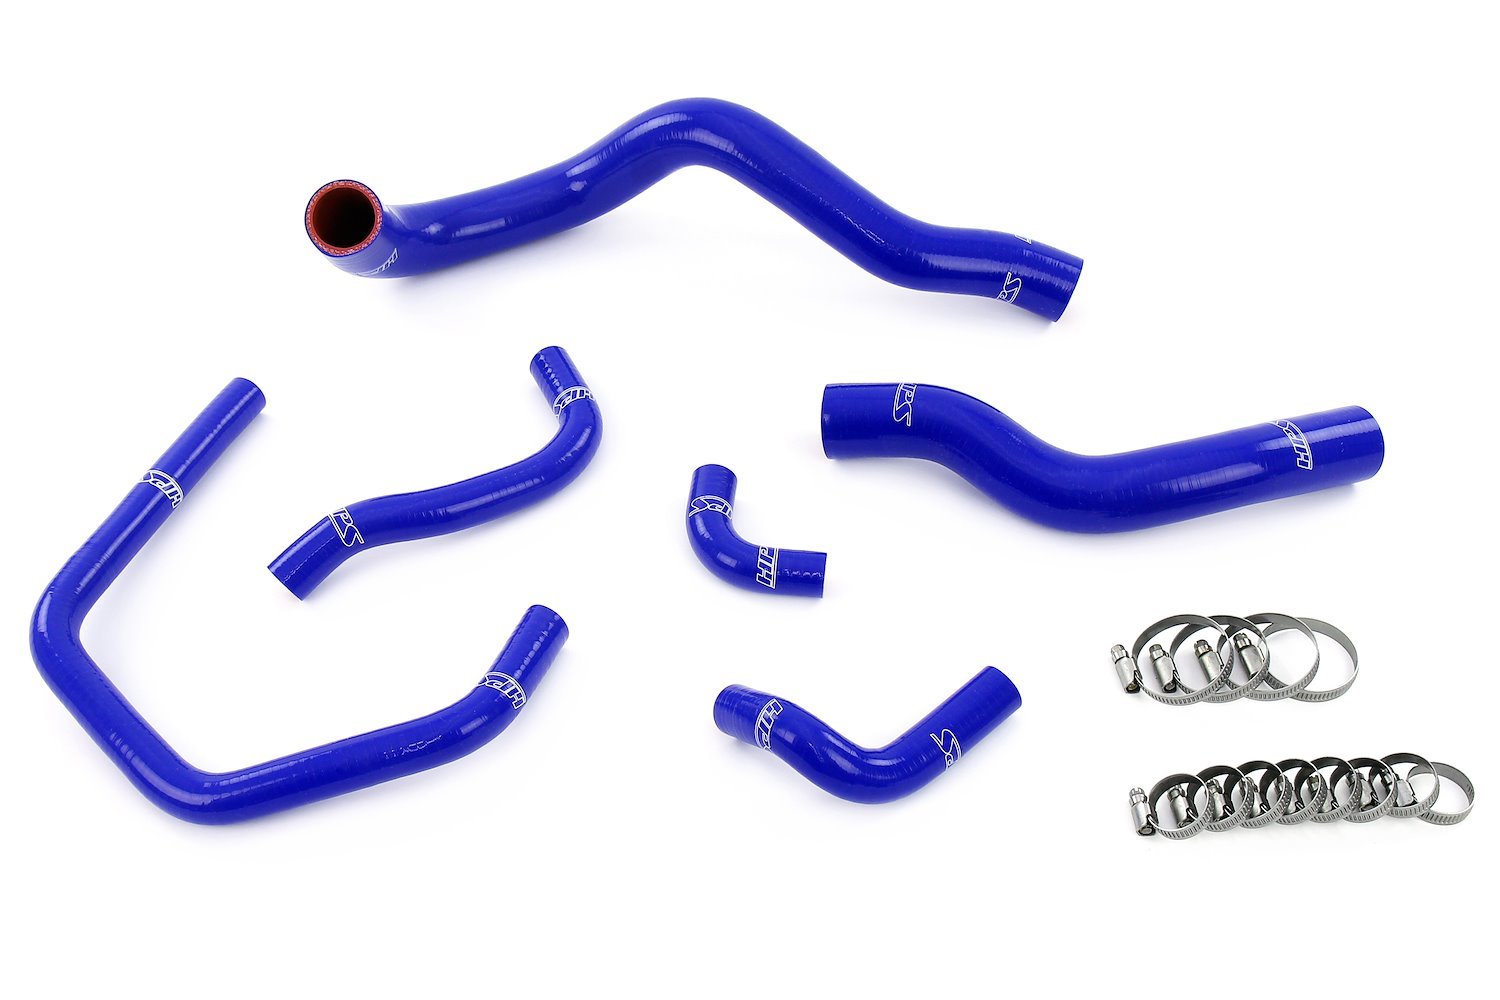 57-2147-BLUE Radiator and Heater Hose Kit, 3-Ply Reinforced Silicone, Replaces OEM Rubber Radiator & Heater Coolant Hoses